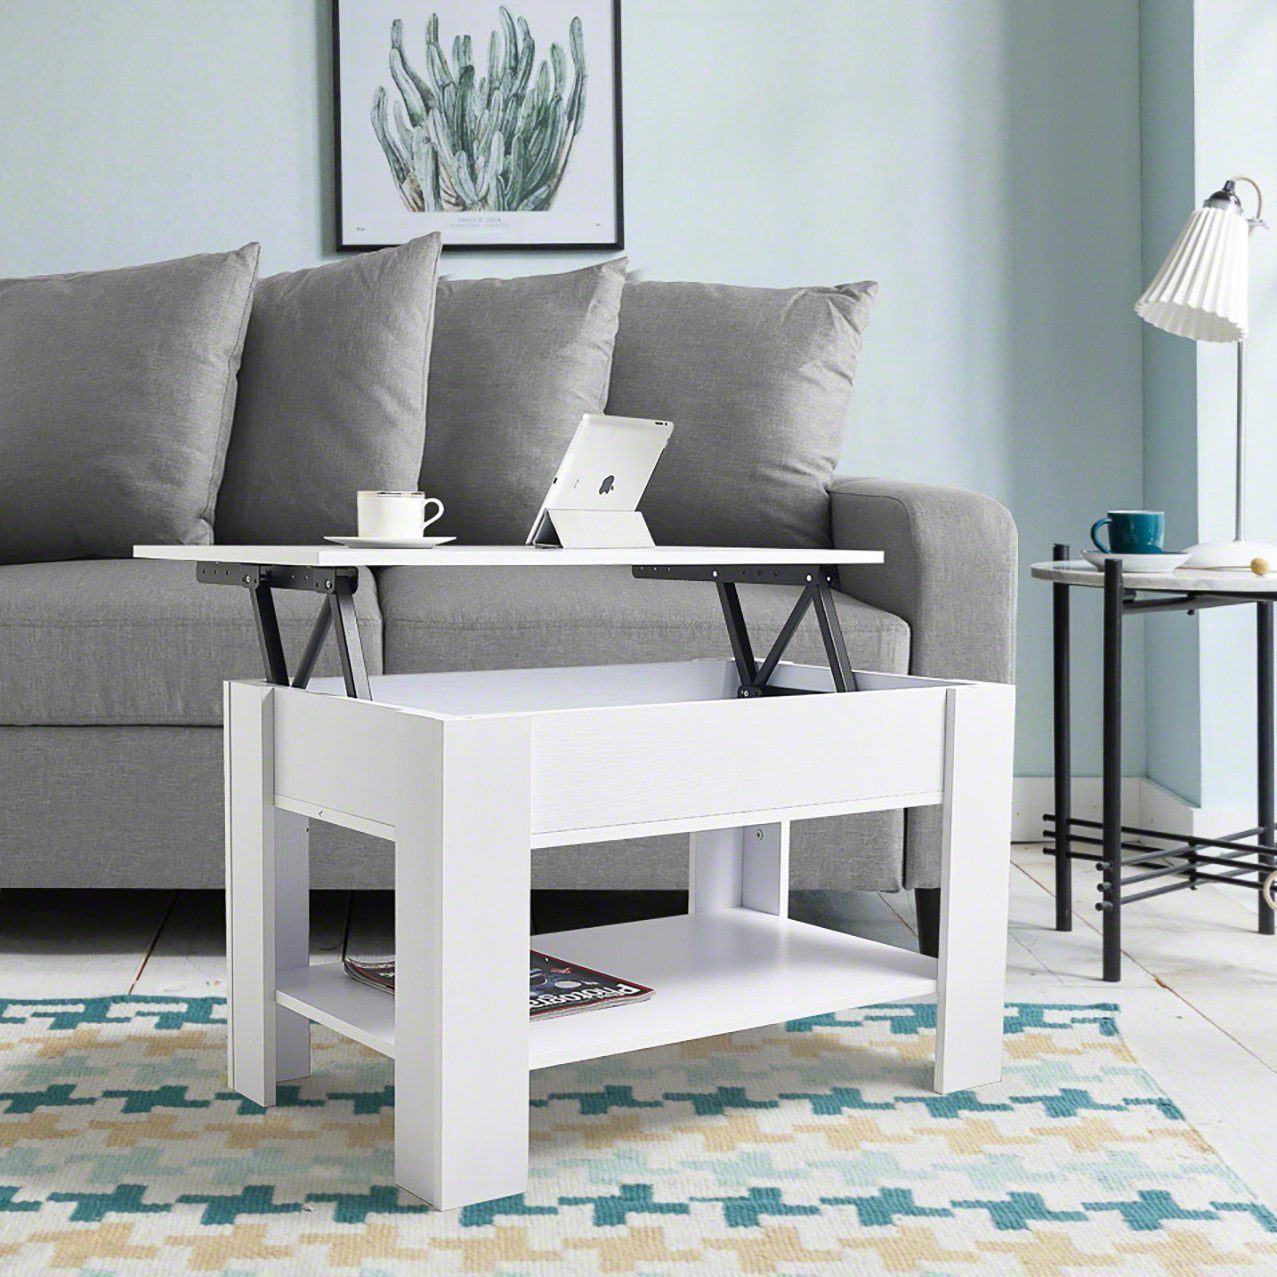 White Lift up Top Coffee Table with Storage / Shelf - Laura James